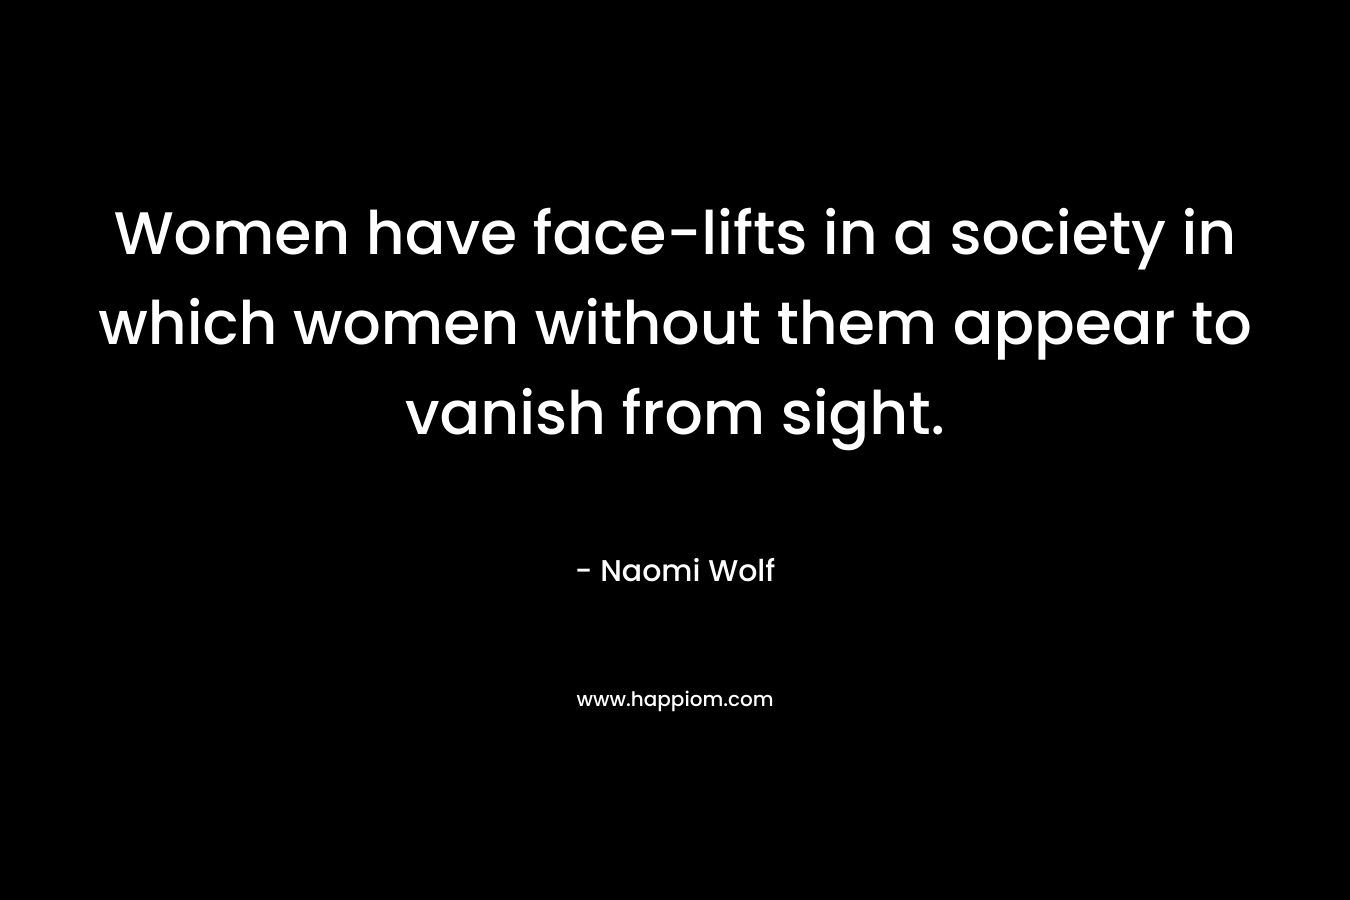 Women have face-lifts in a society in which women without them appear to vanish from sight.